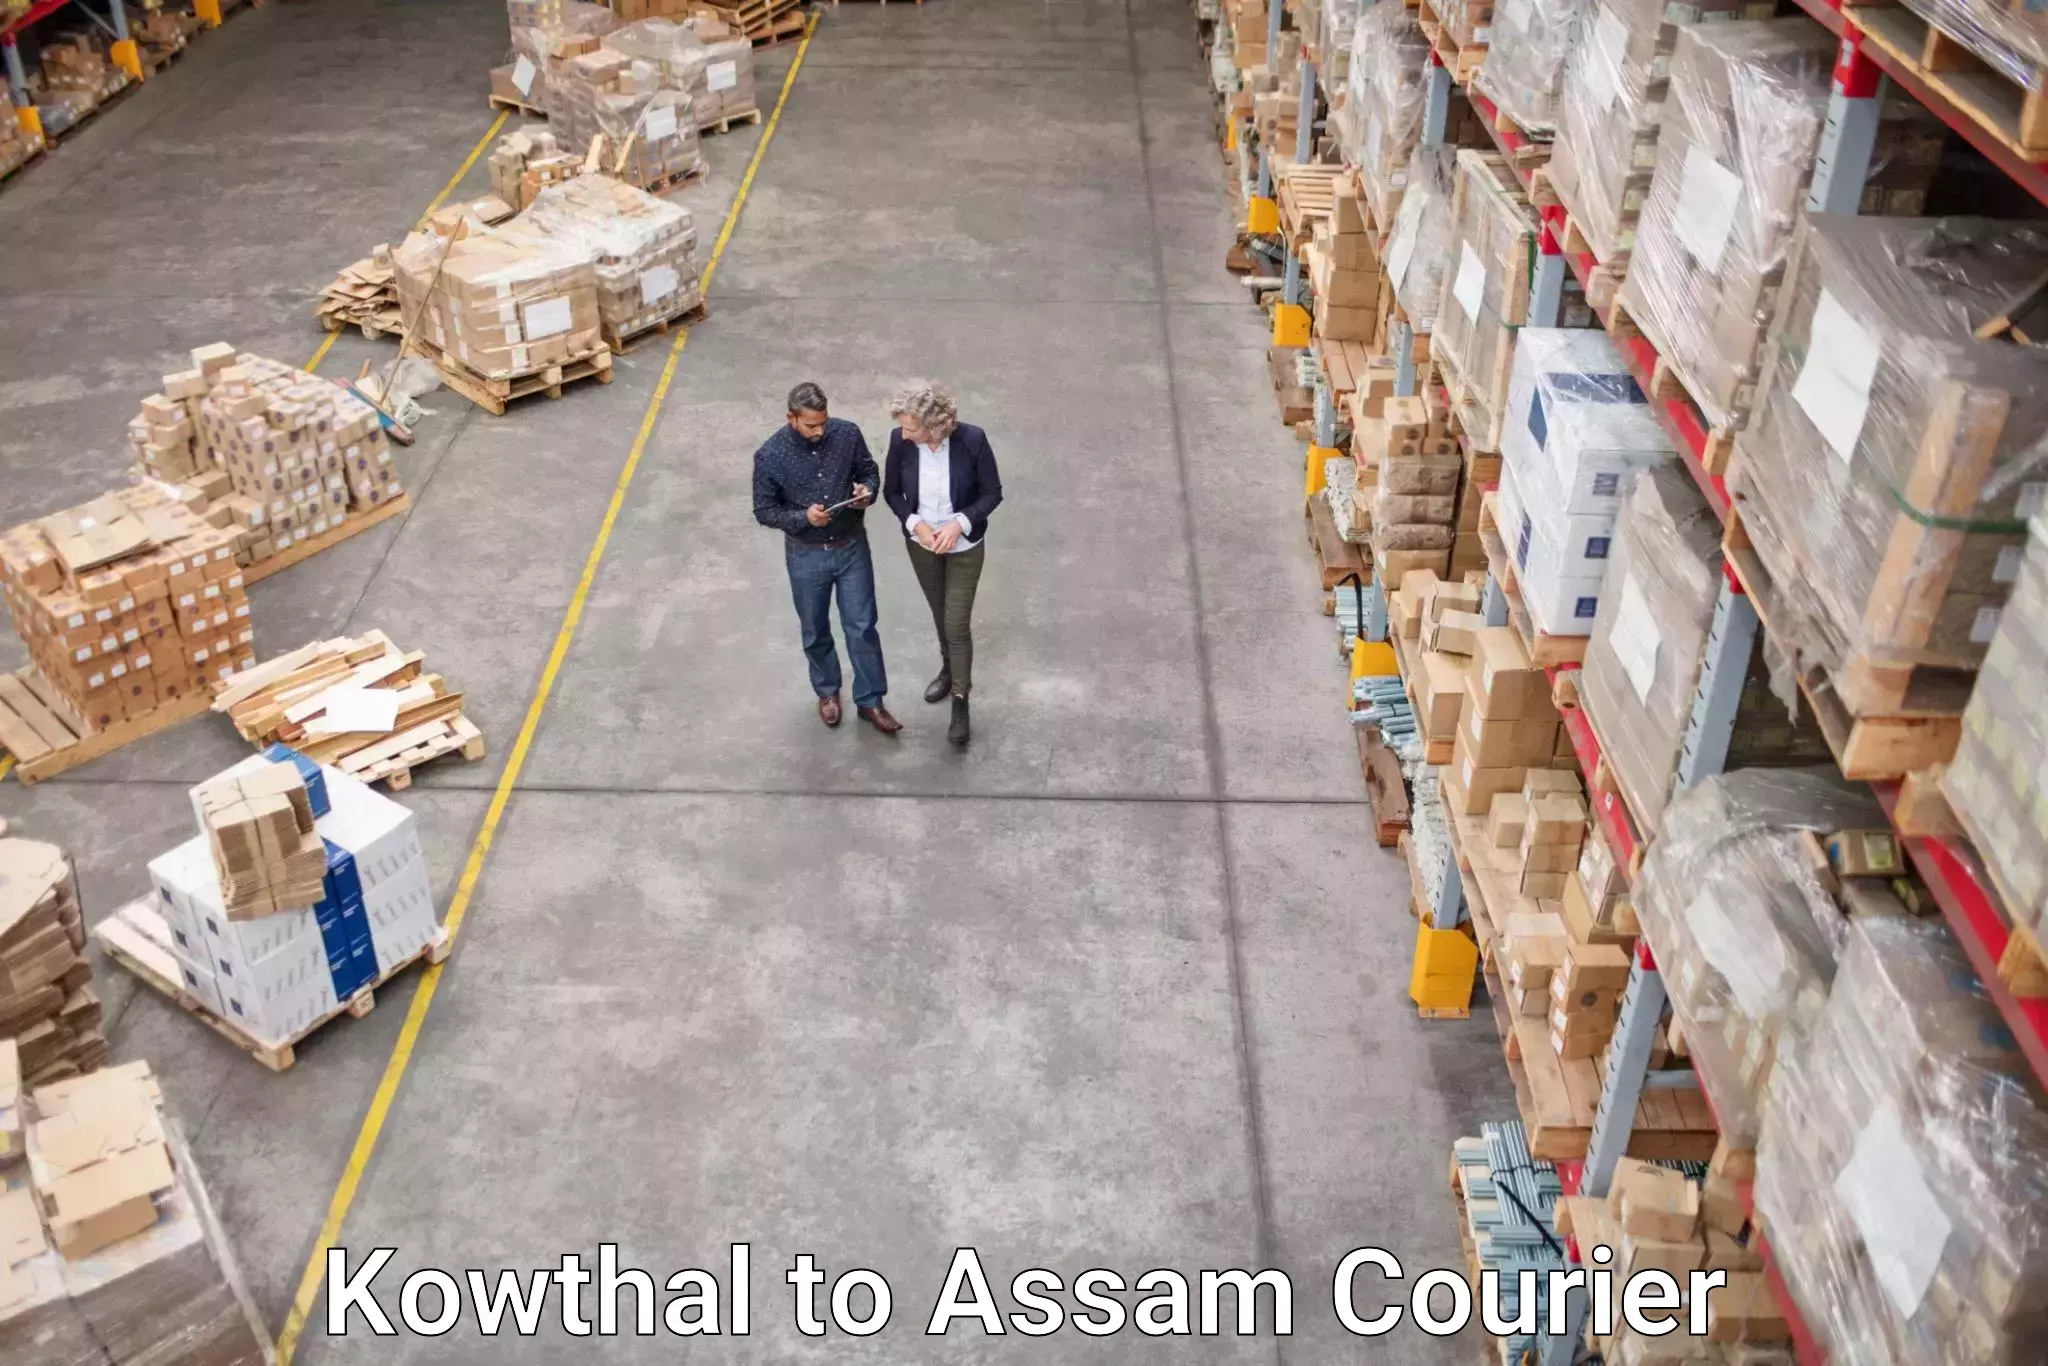 24/7 courier service Kowthal to Assam